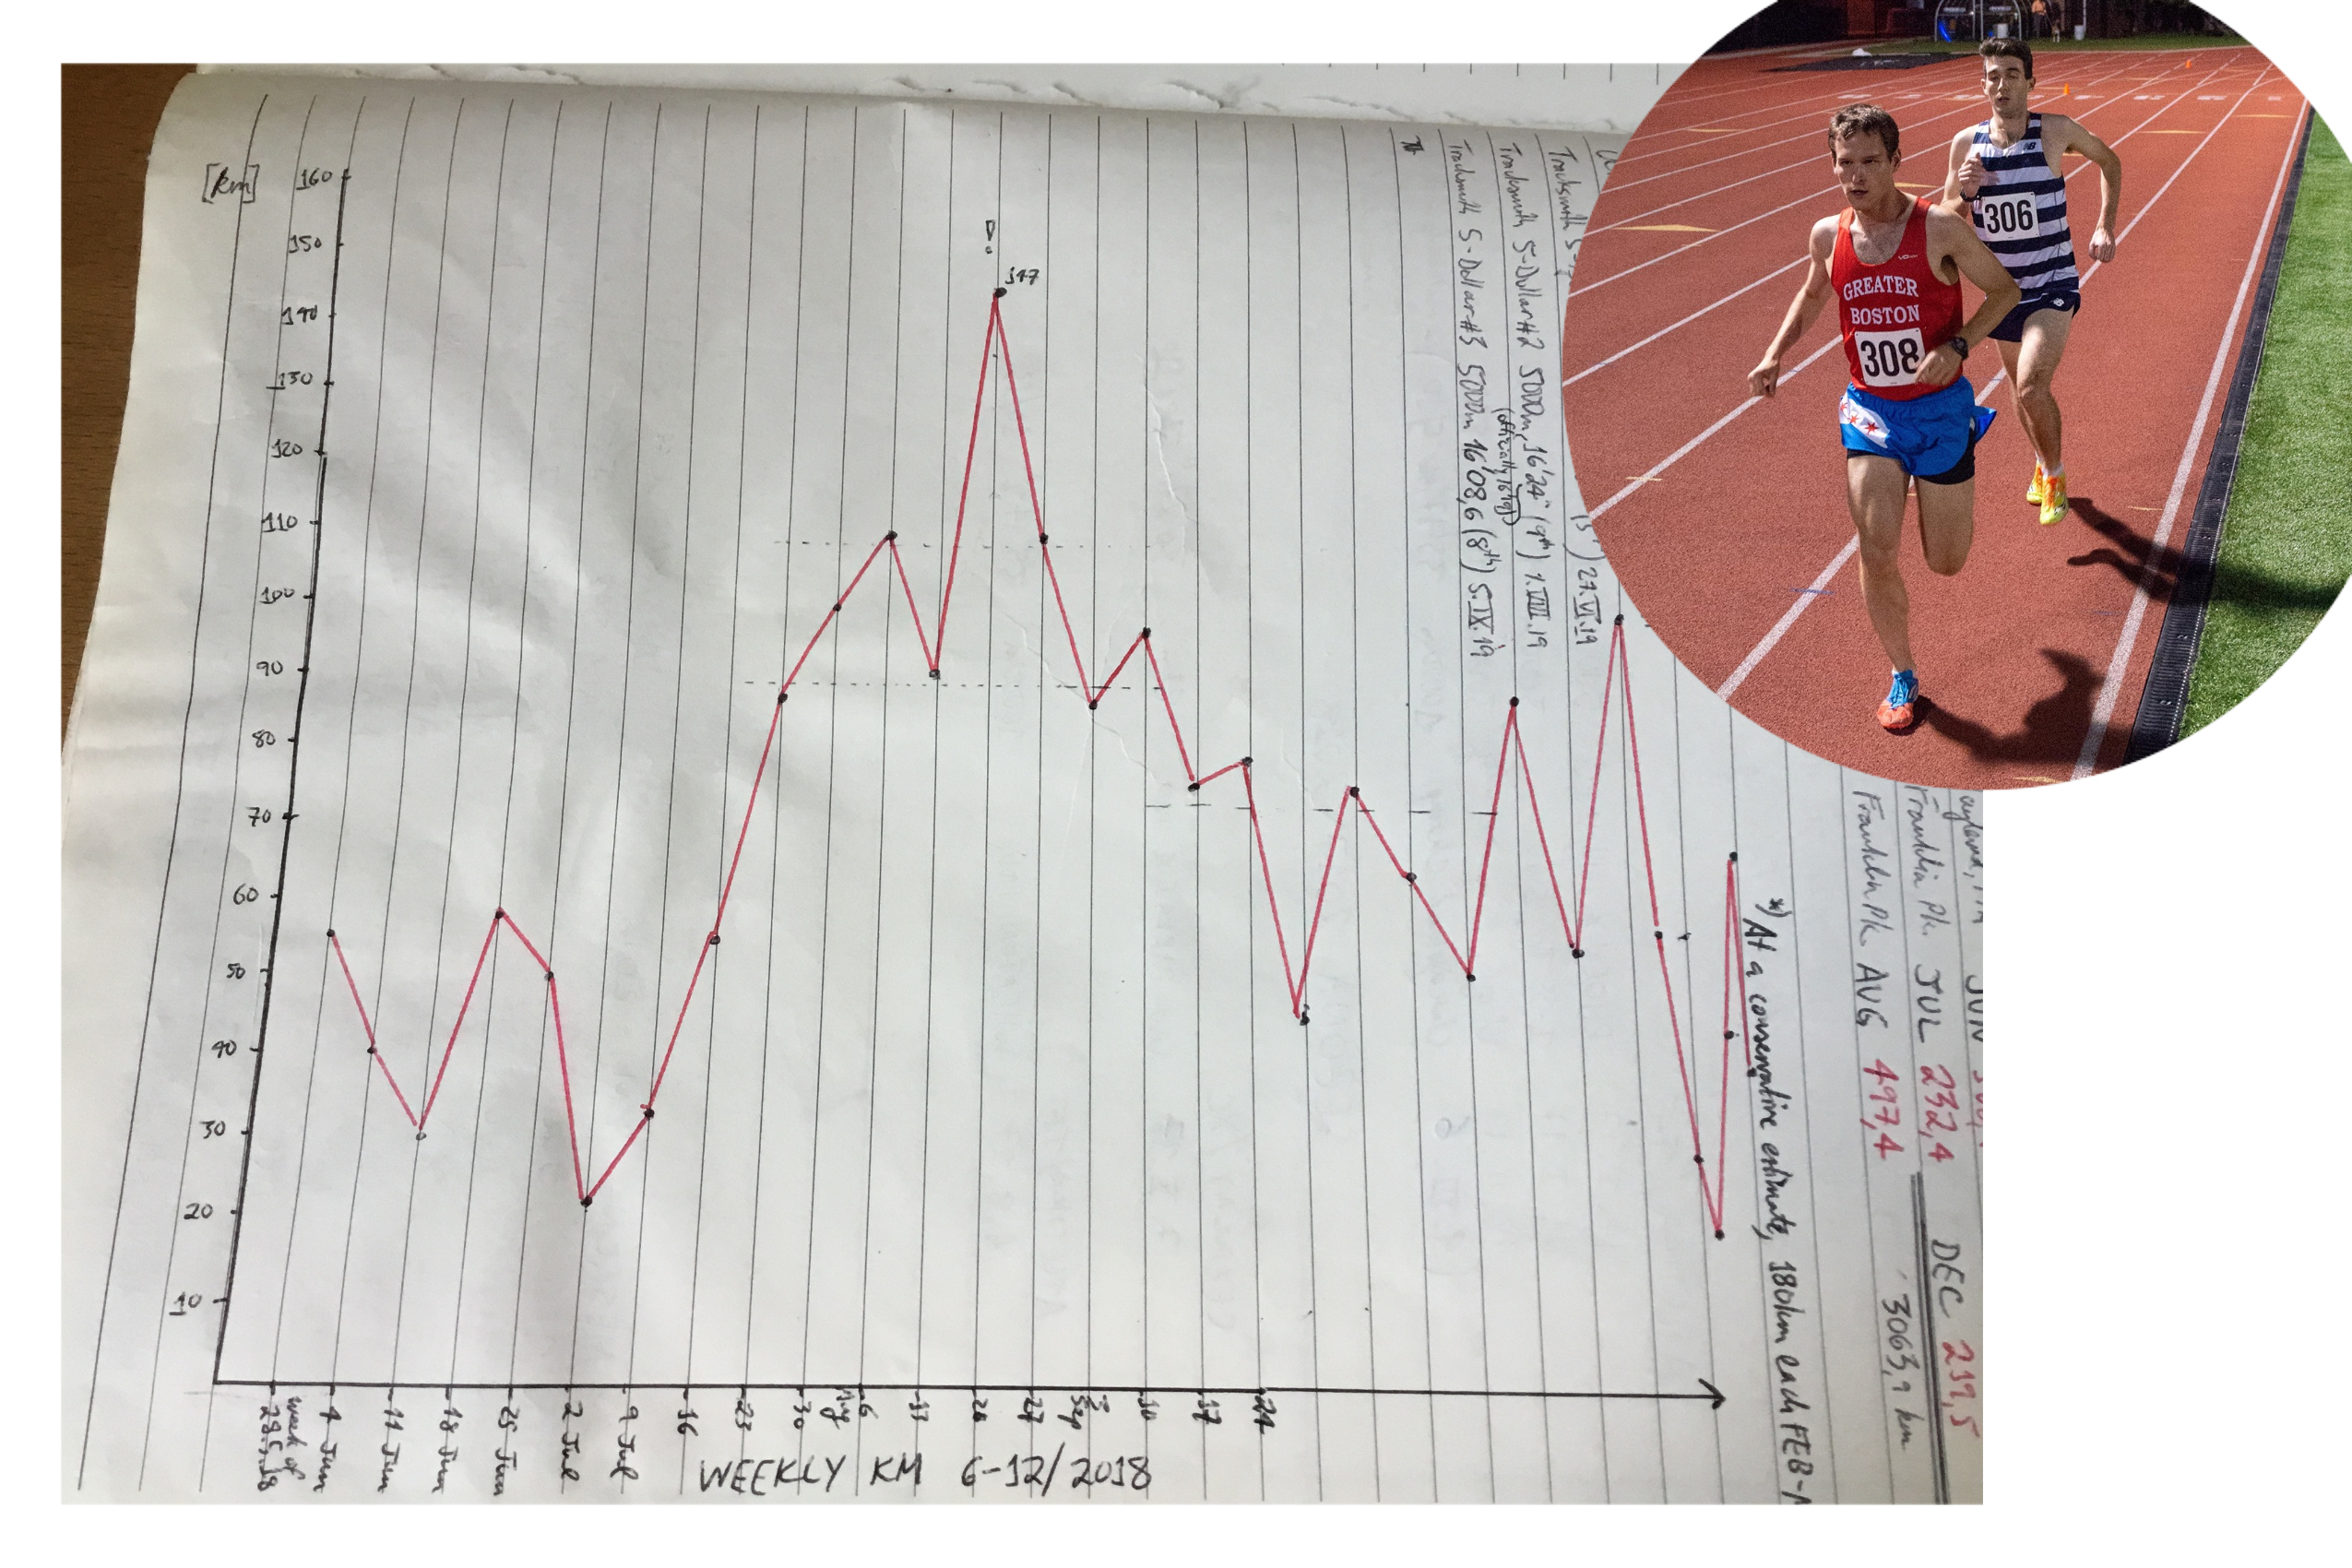 A graph of Michael Stubna’s training runs (in km) each week from June to December 2018. Inset: Stubna competes in a 5K race in summer 2019. Photos: courtesy of Michael Stubna